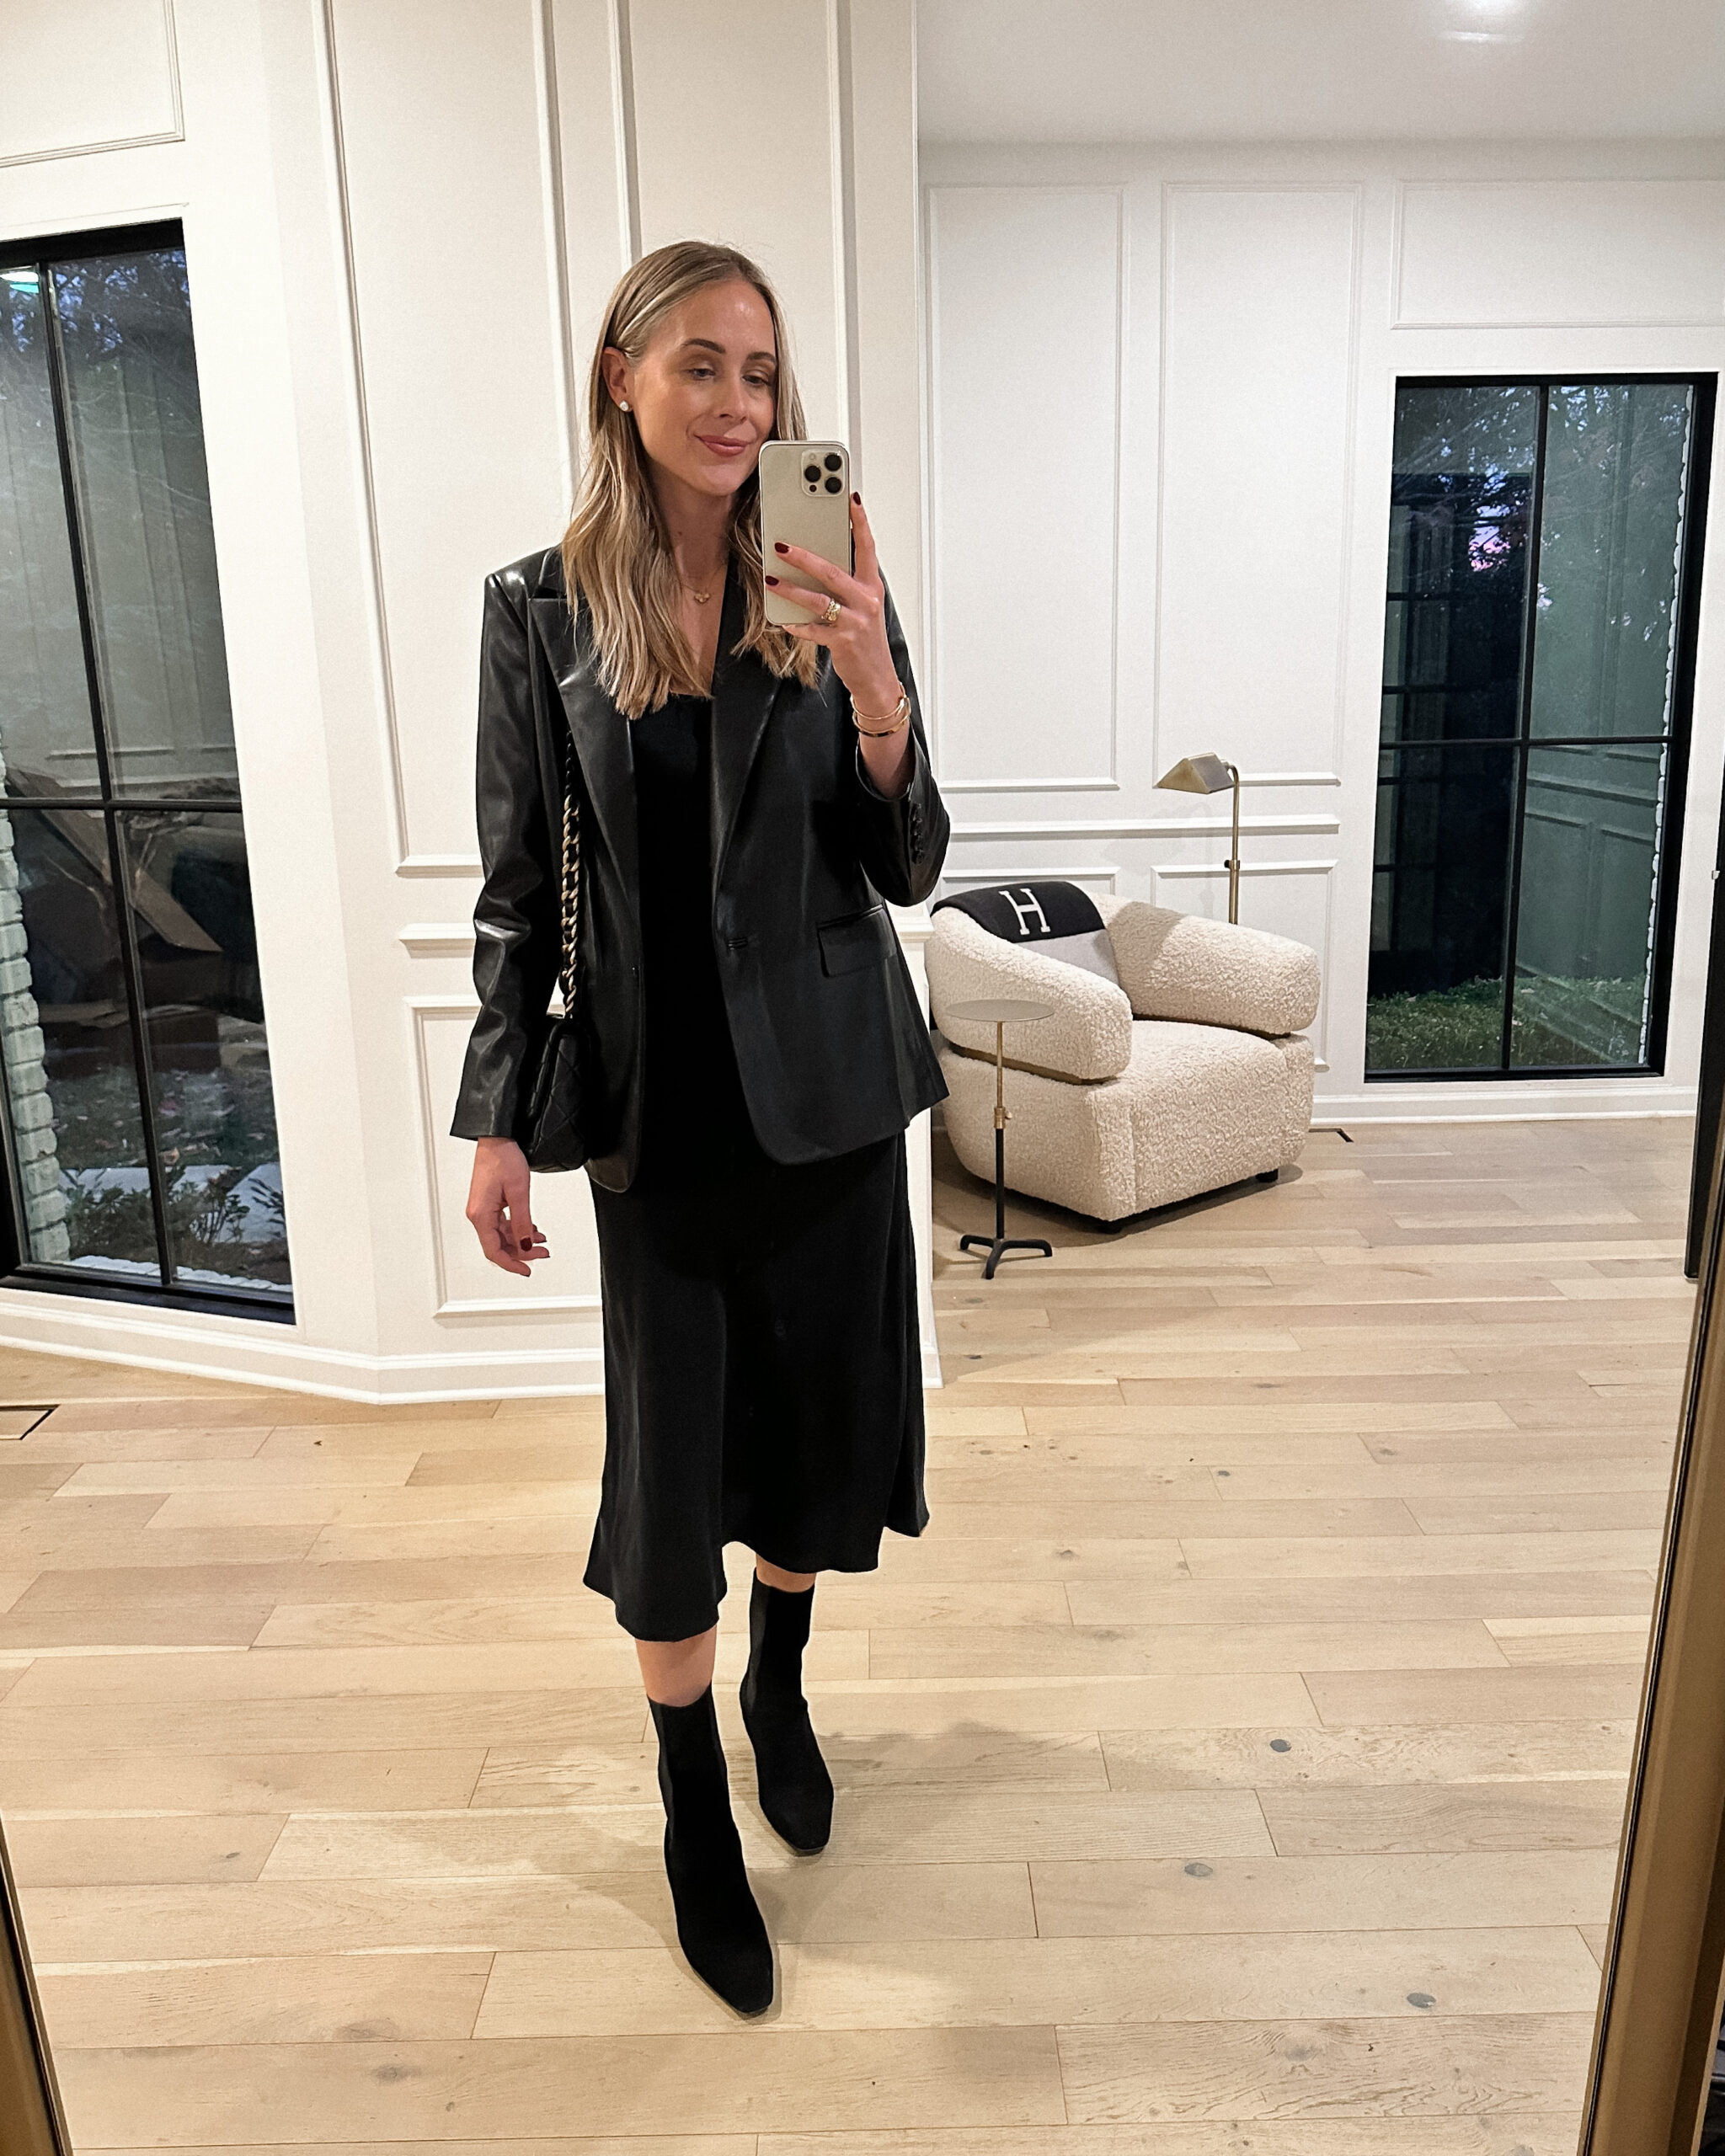 Fashion Jackson Wearing Fall Capsule Outfit Black Slip Dress Black Faux Leather Blazer Black Toteme Boots Fall Date Night Nashville Outfit